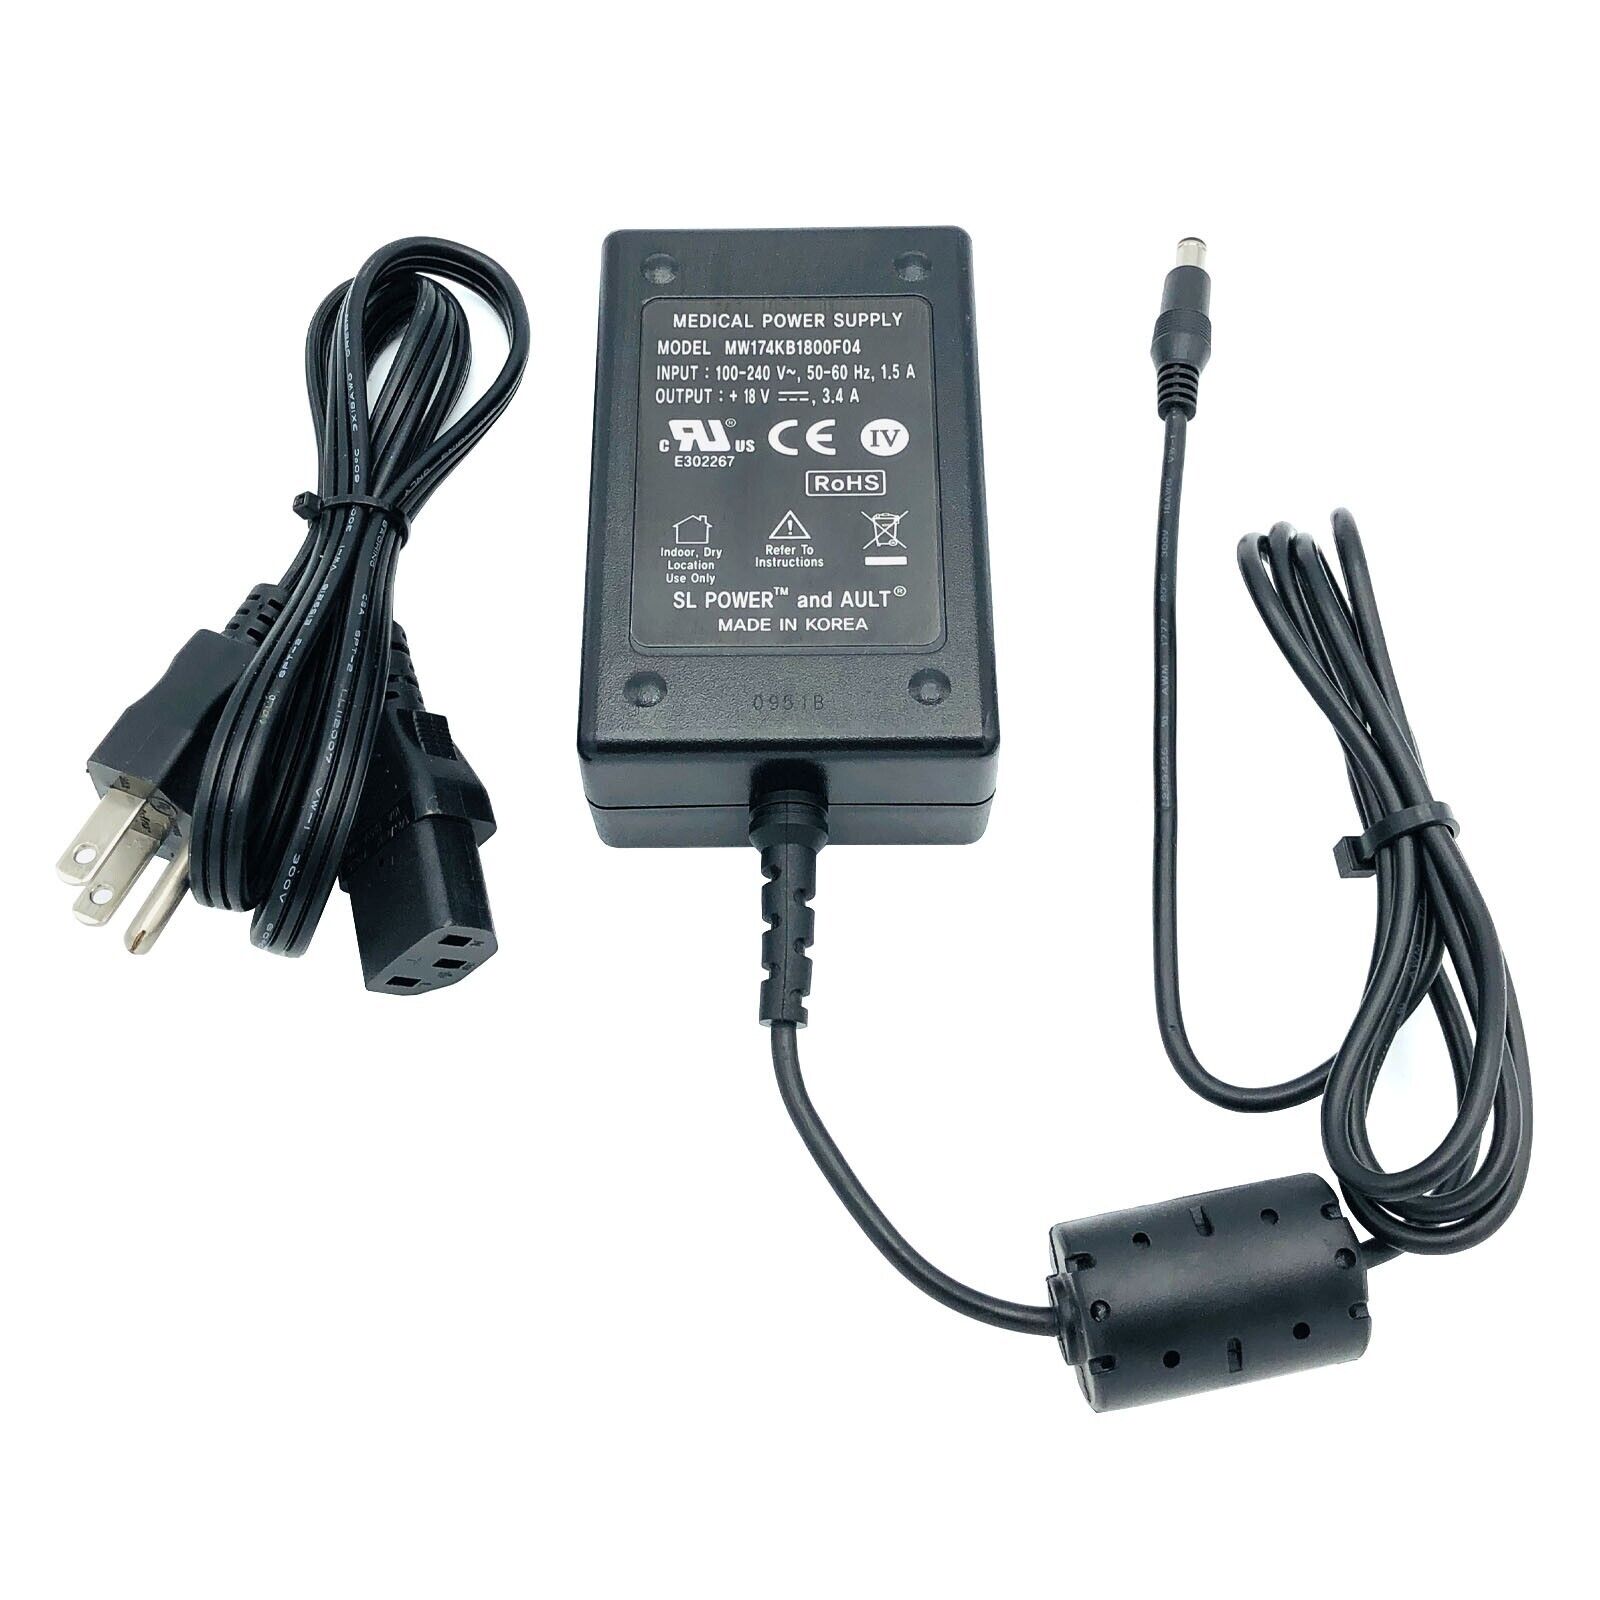 *Brand NEW*Original Ault 18V 3.4A AC Adapter Charger MW174KB1800F04 Medical Power Supply